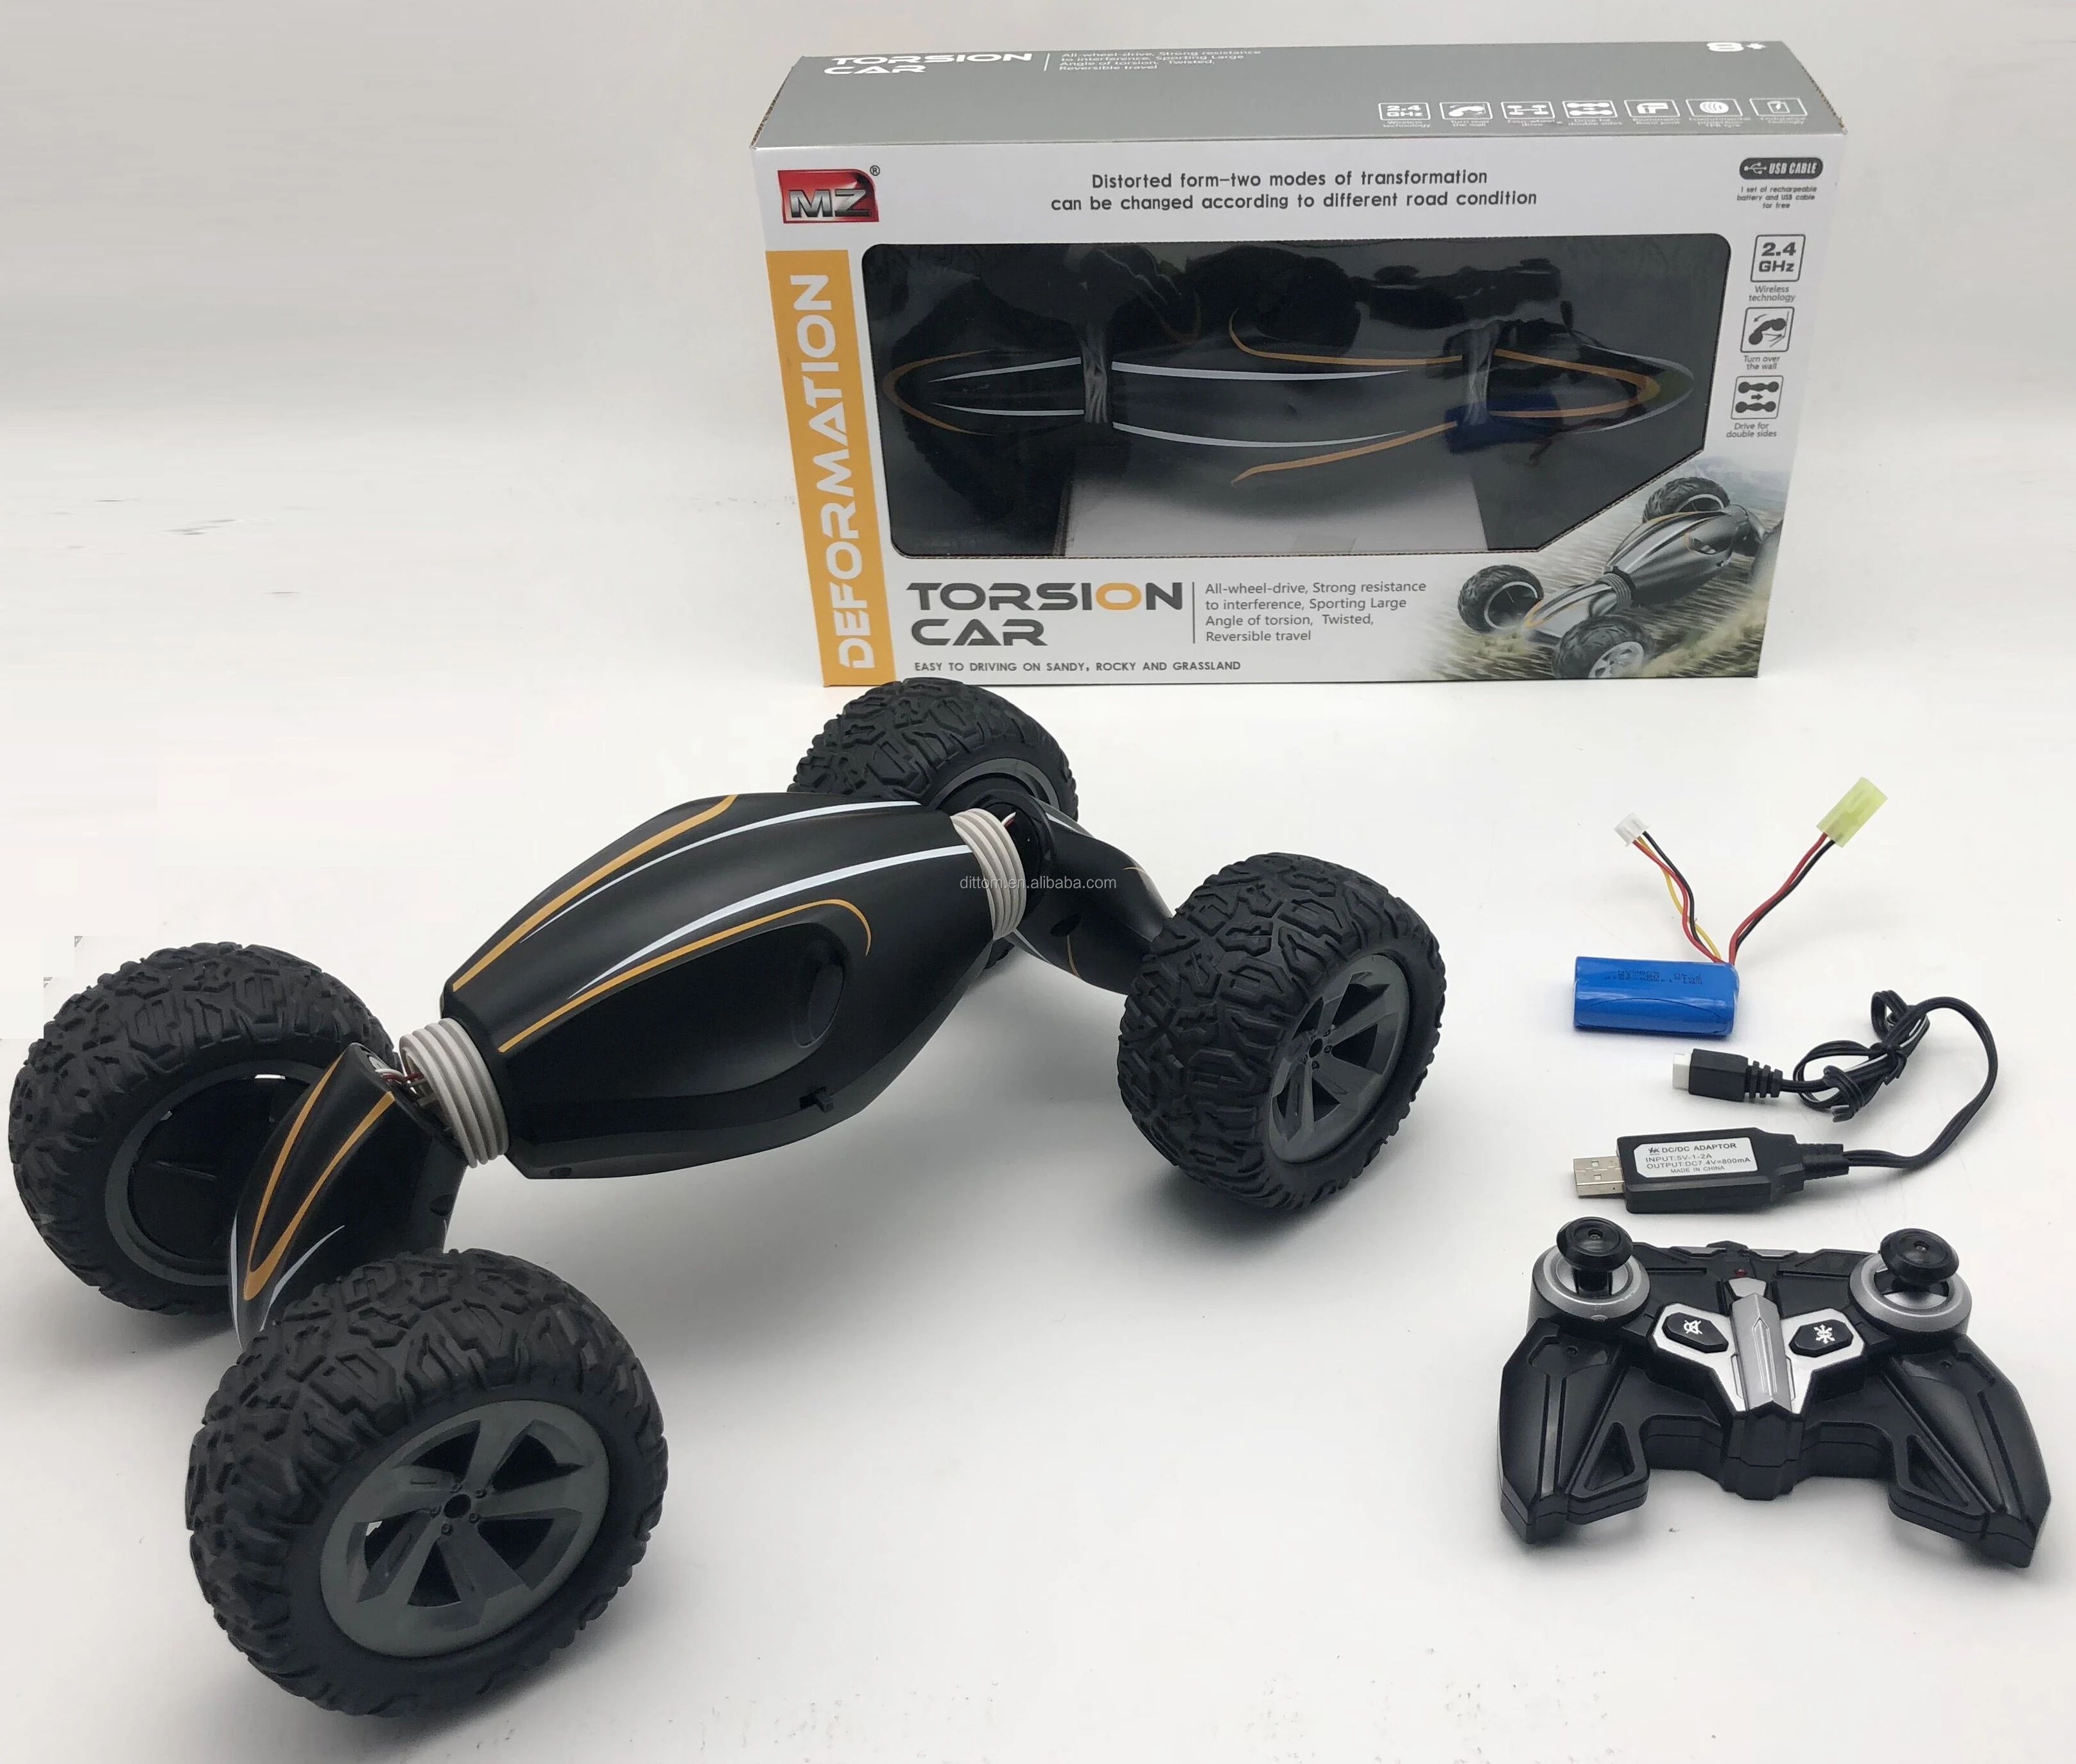 Double Sided Torsion car 2.4G 4WD 1:10 RC Twist Car Overturned Flexible Spinner Large Rc Stunt Rock Crawler truck